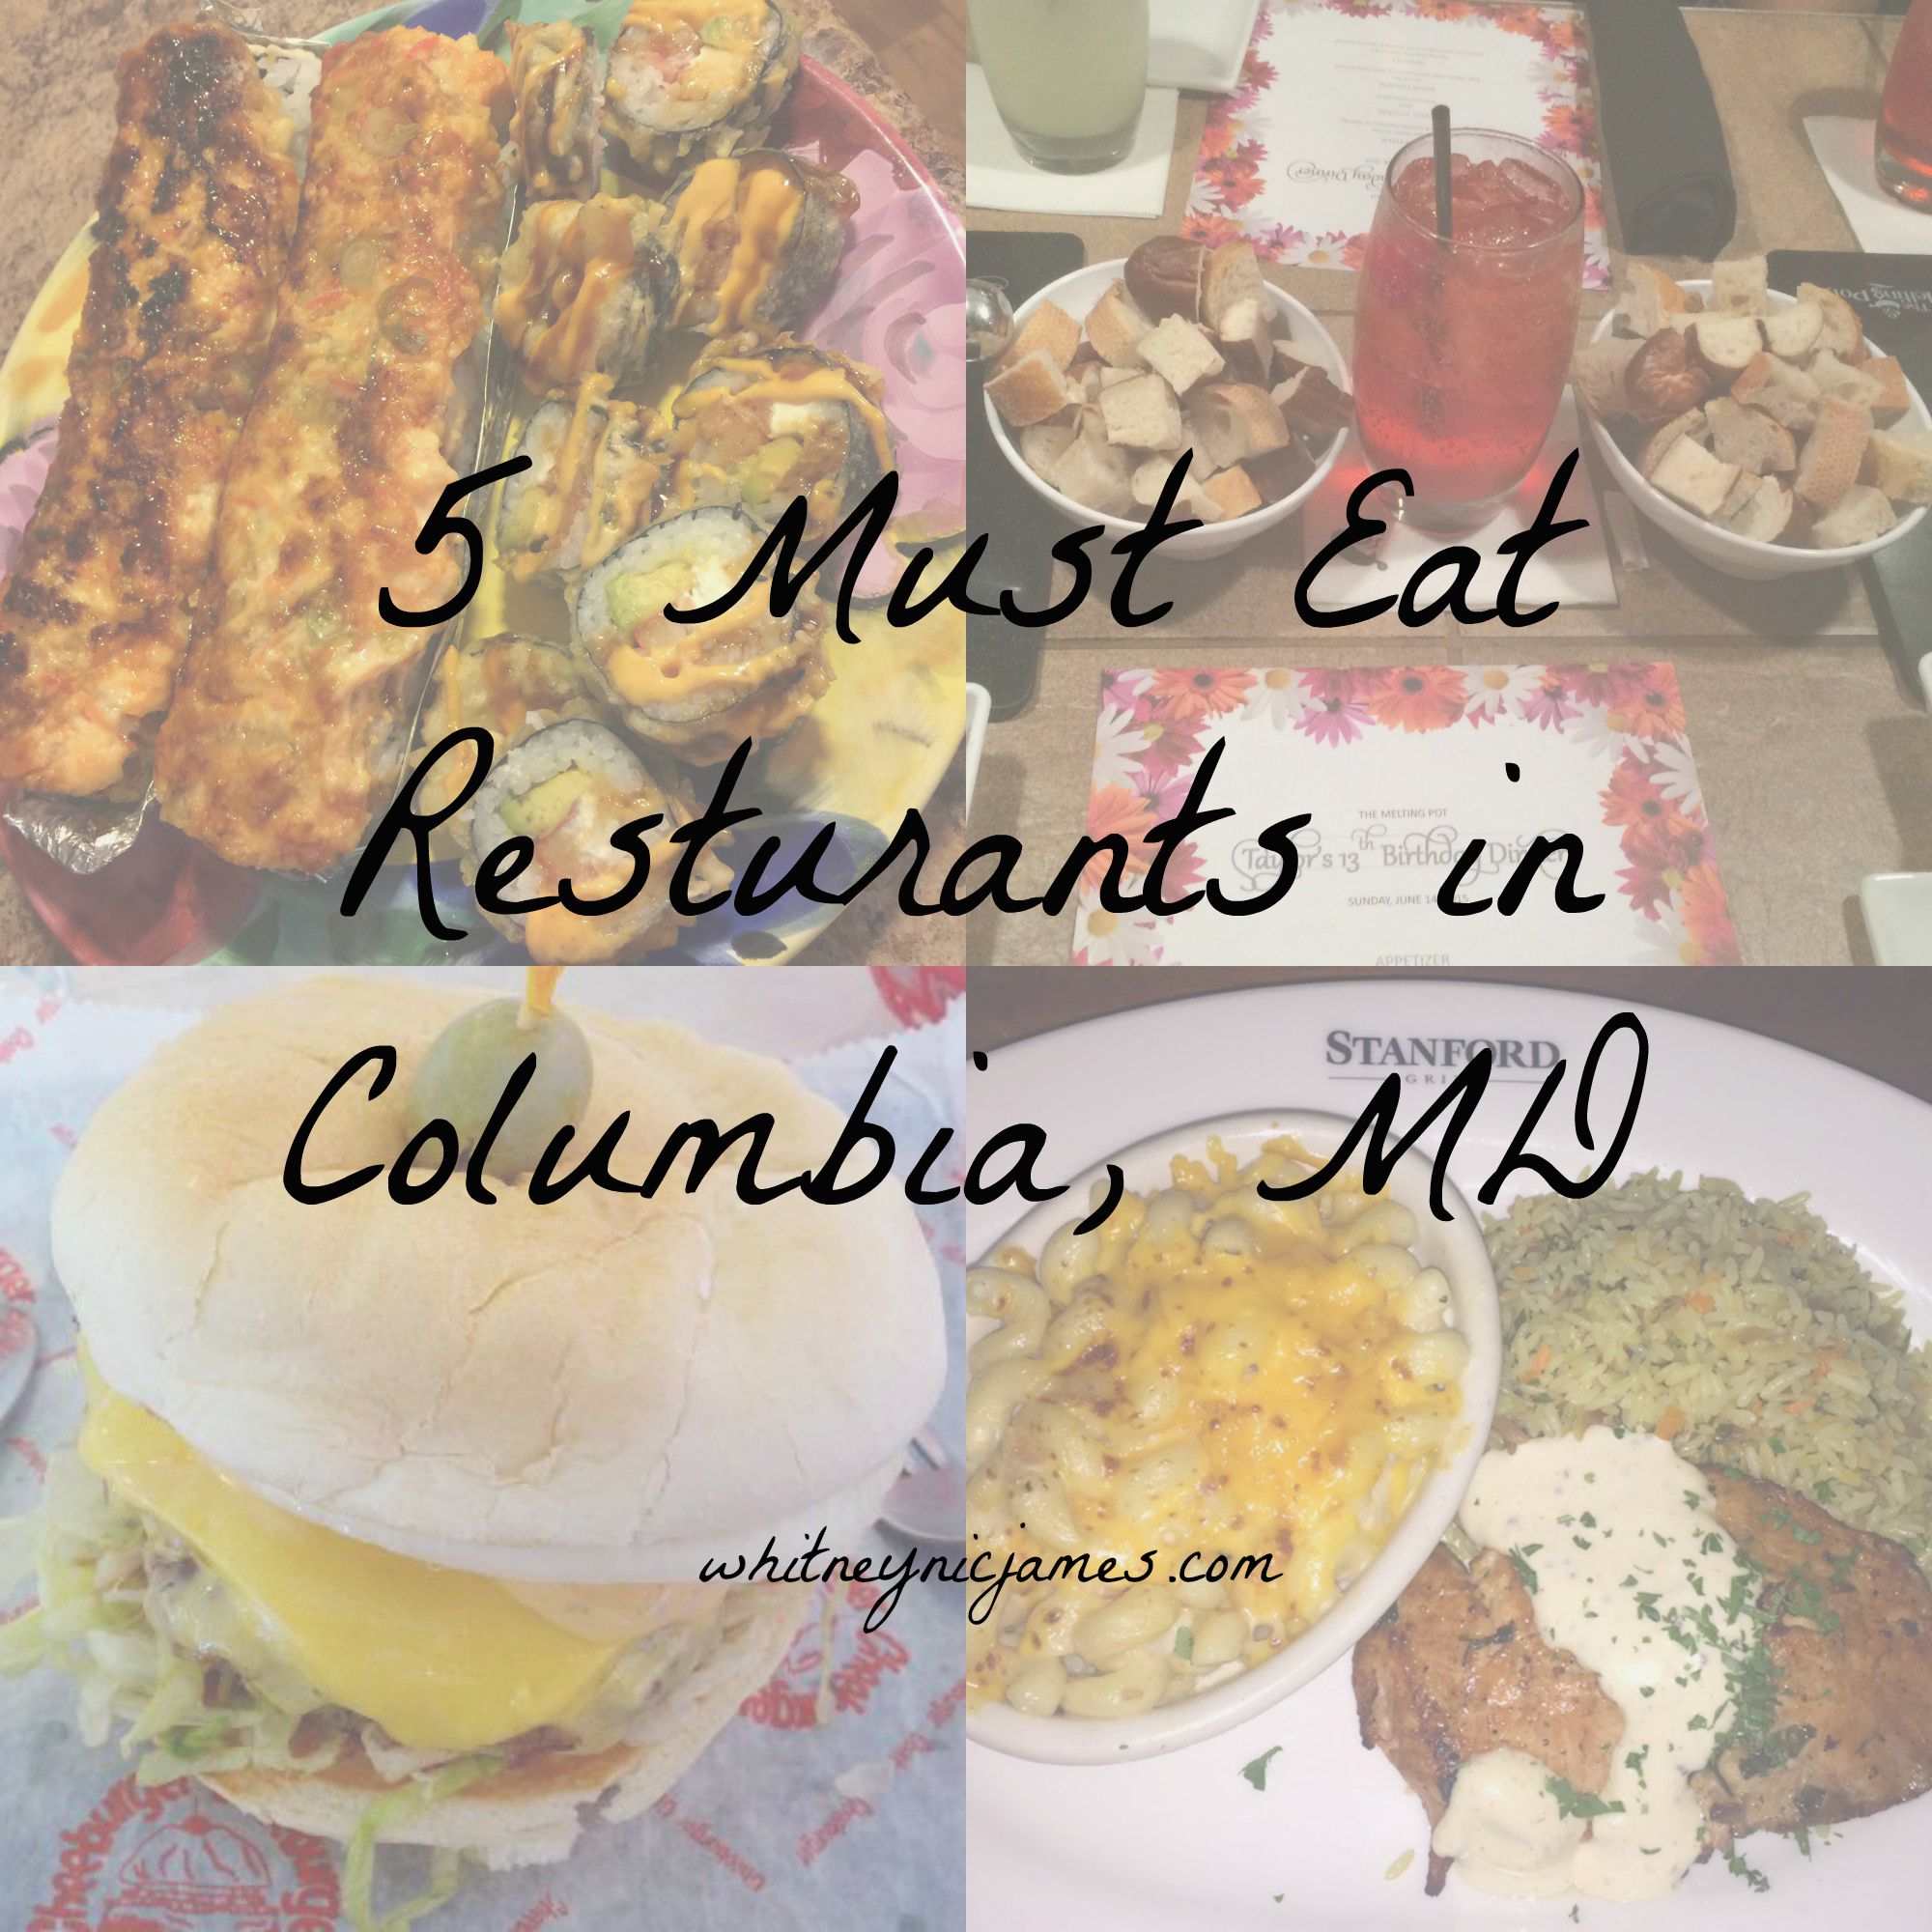 Resturants in Columbia, MD